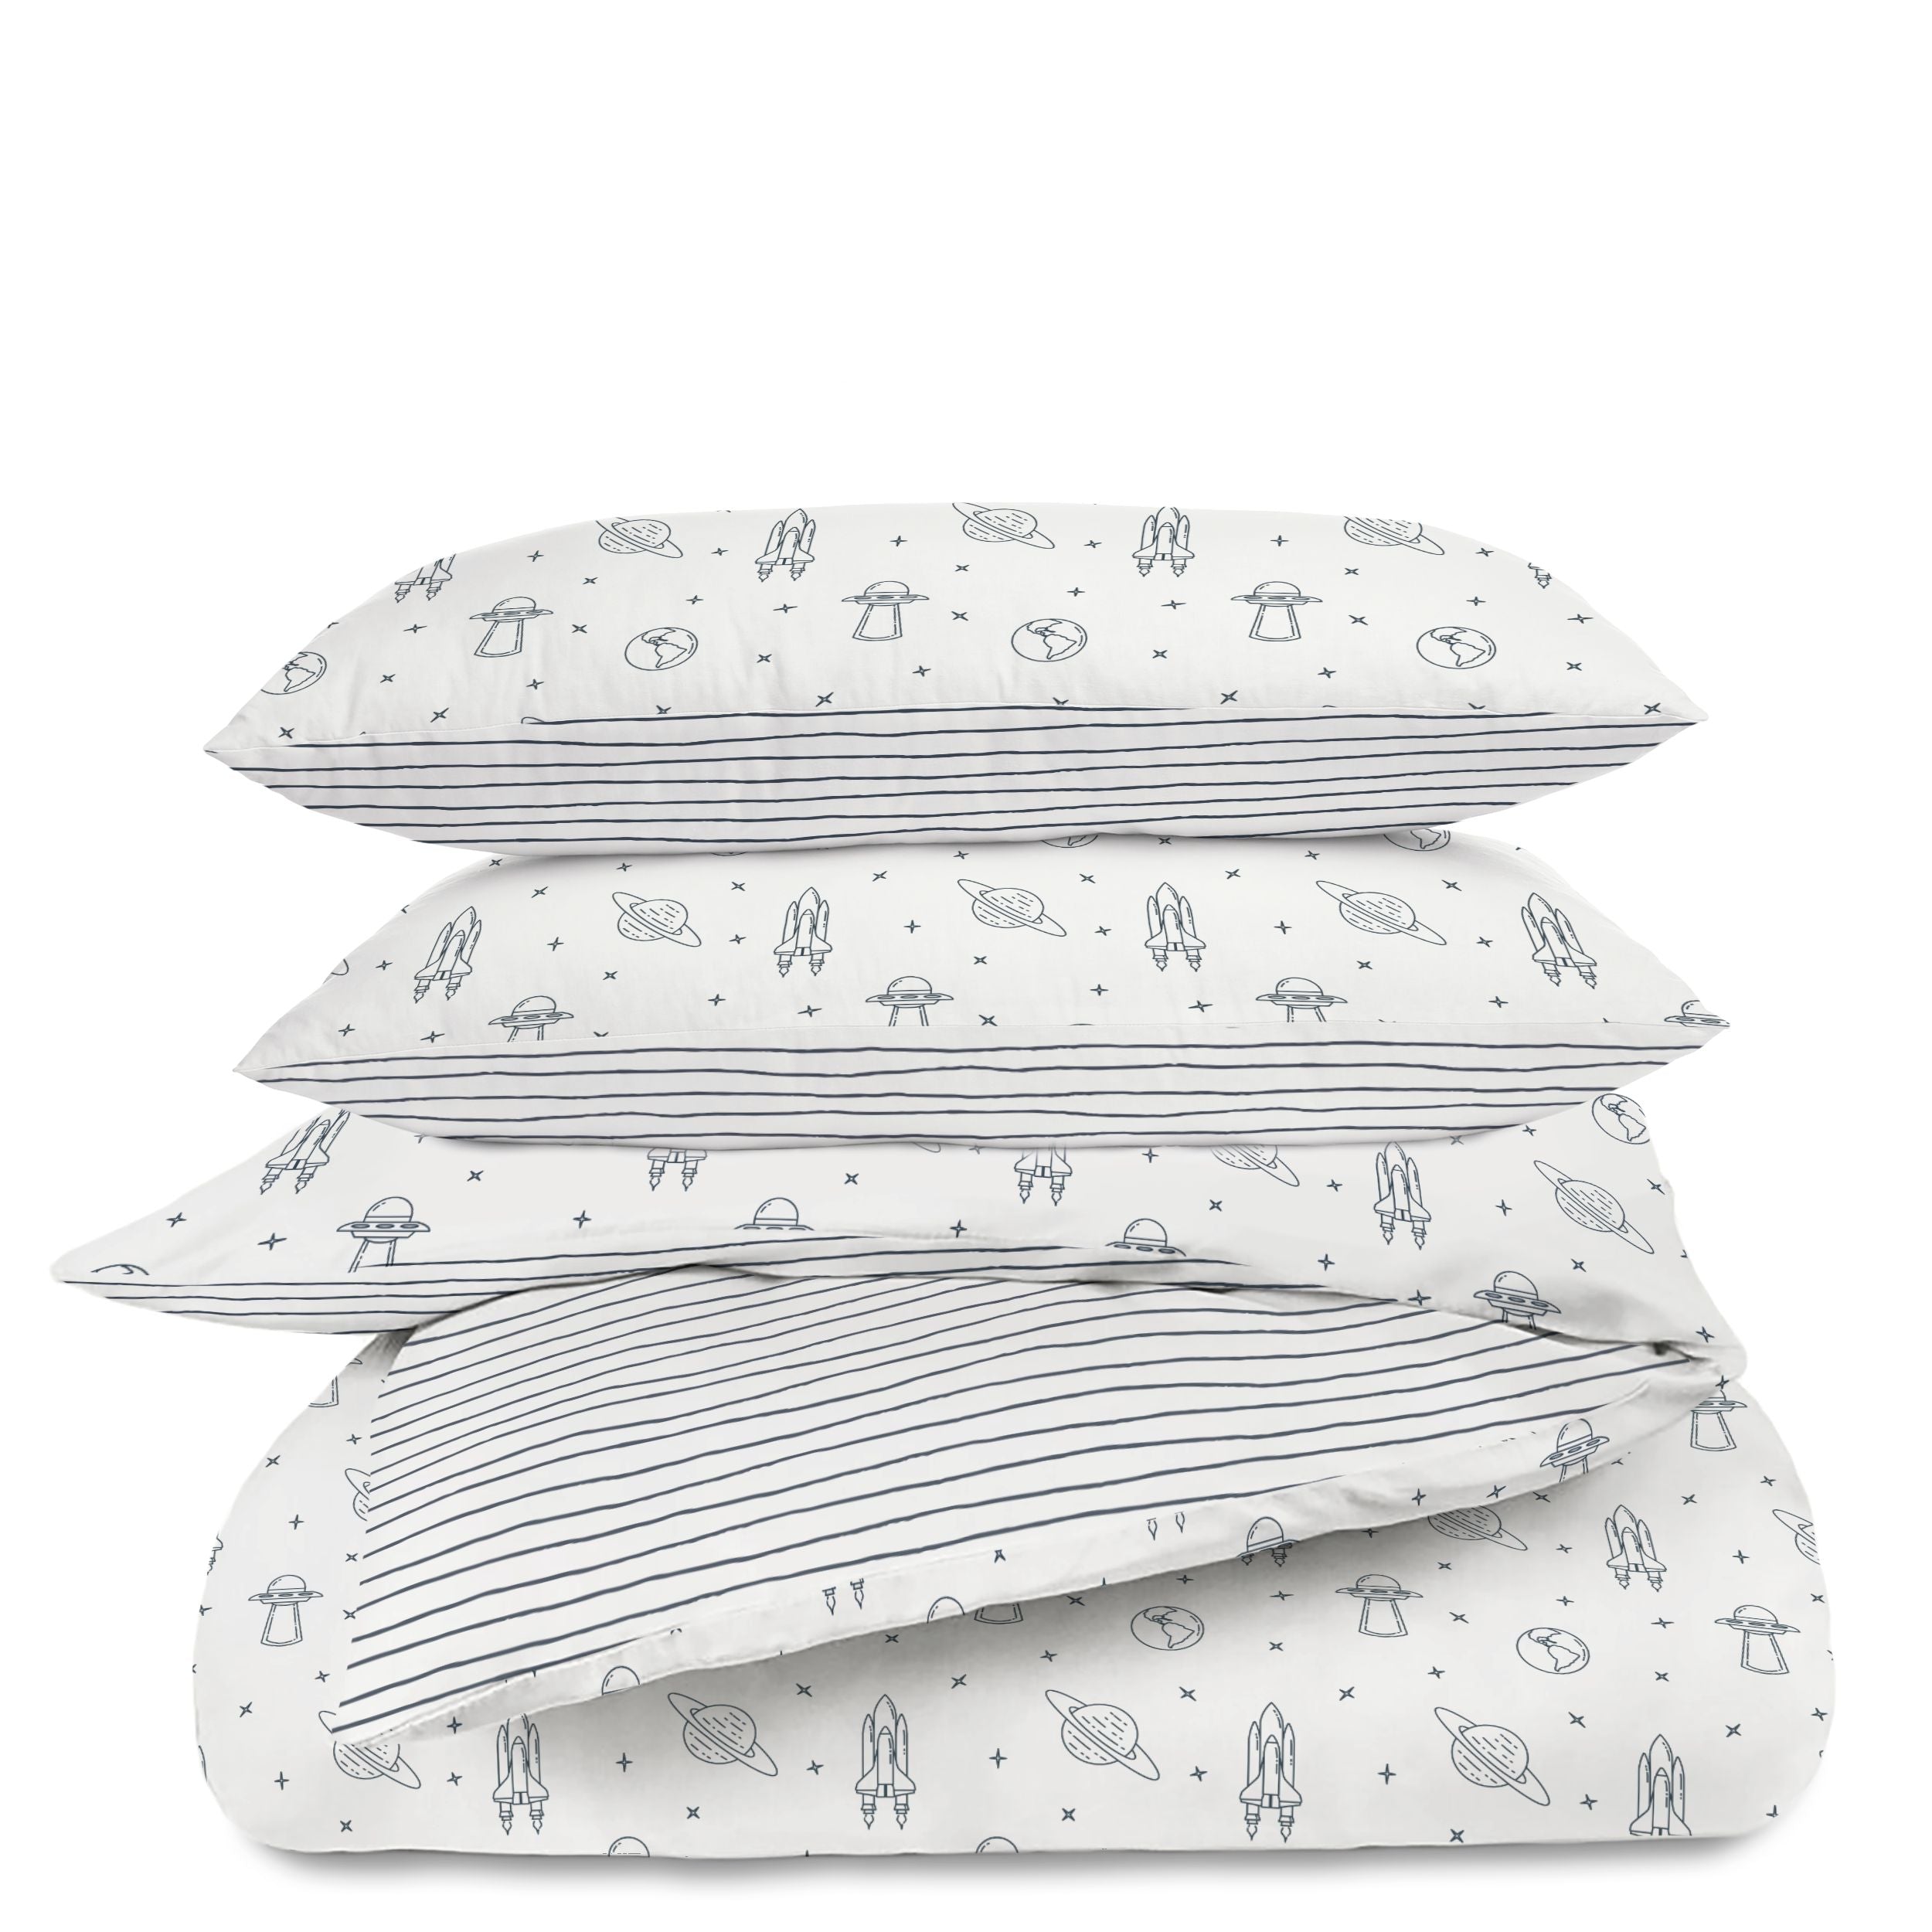 Four stacked pillows with different patterns including striped and doodle designs with trees, mountains, and space motifs, all in black and white, on a white background featuring the Organic Duvet Cover - Celestial & Cobi Blue Stripes by Makemake Organics.